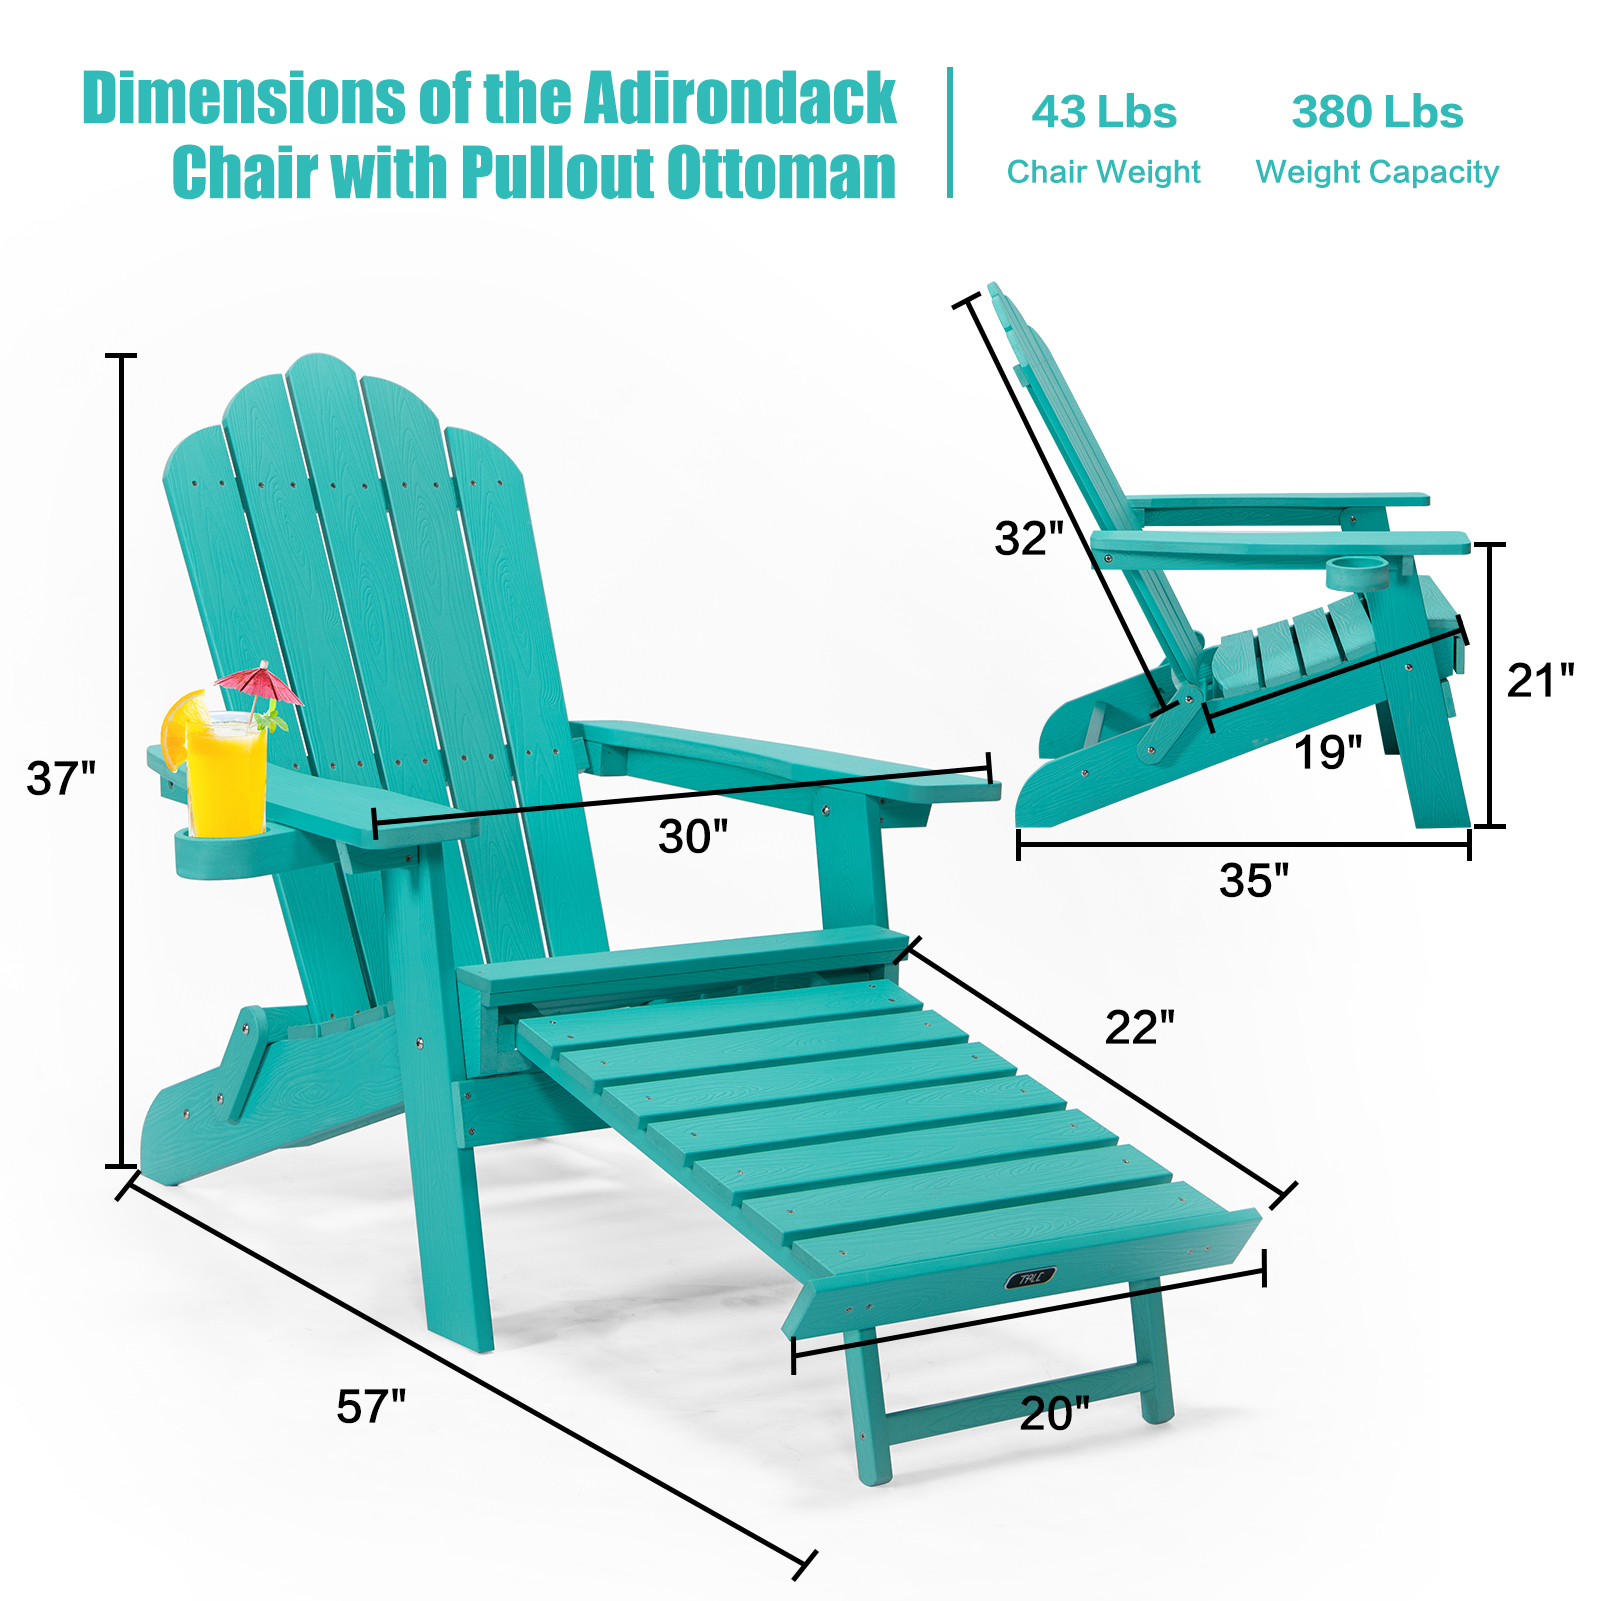 GZXS Folding Adirondack Chair with Pullout Ottoman and Cup Holder, Oaversized Wood Lounge Chair for Patio Deck Garden, Backyard Furniture, Green - image 4 of 10